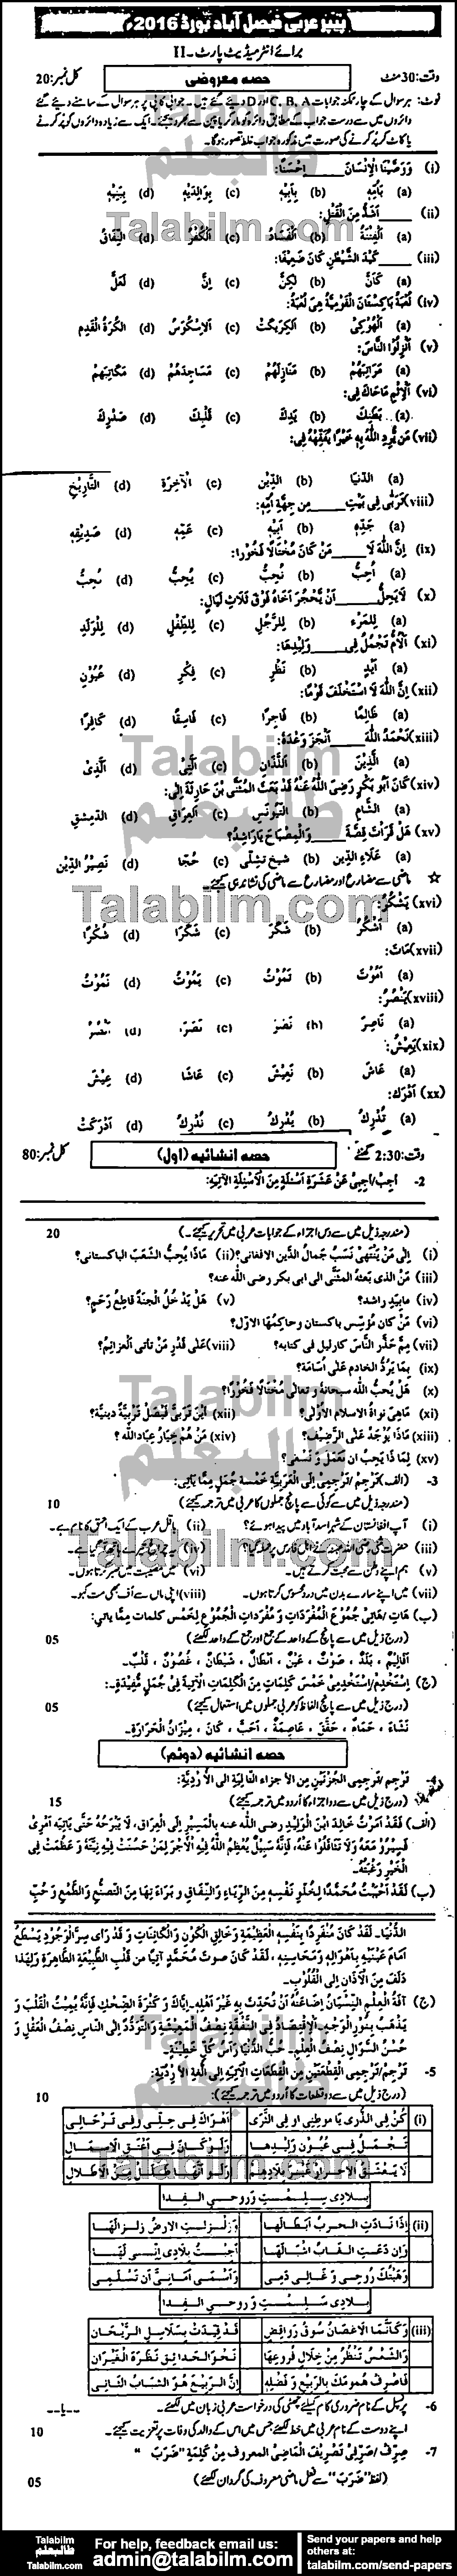 Arabic 0 past paper for Group-I 2016